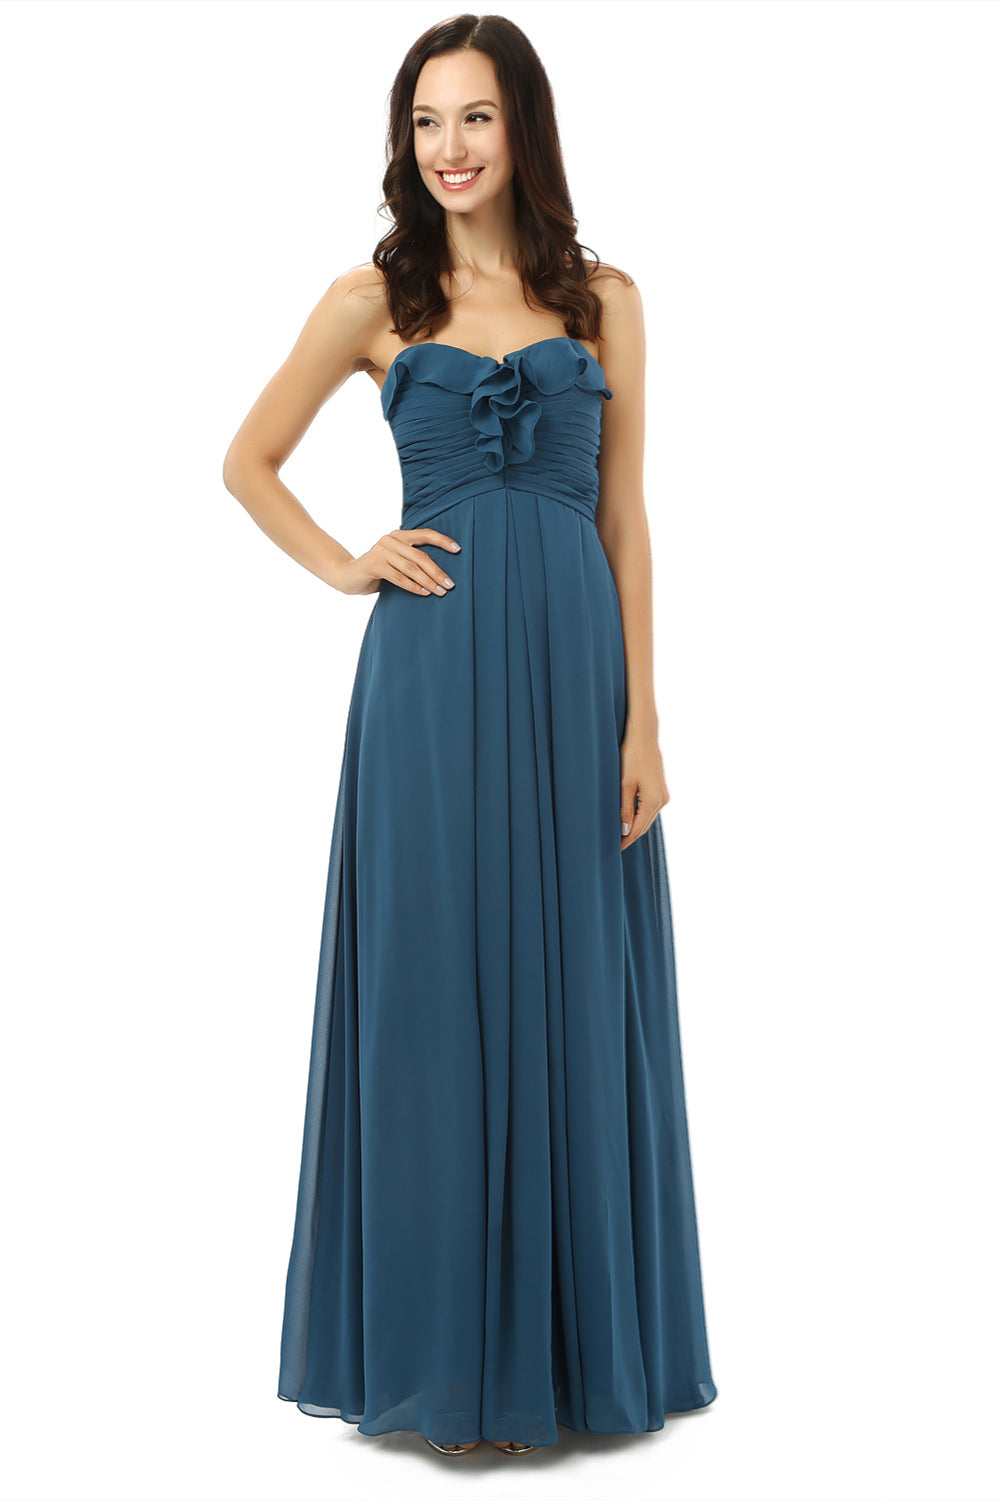 Simple Navy Blue Chiffon Sweetheart Floor Length Corset Bridesmaid Dresses outfit, Prom Shoes